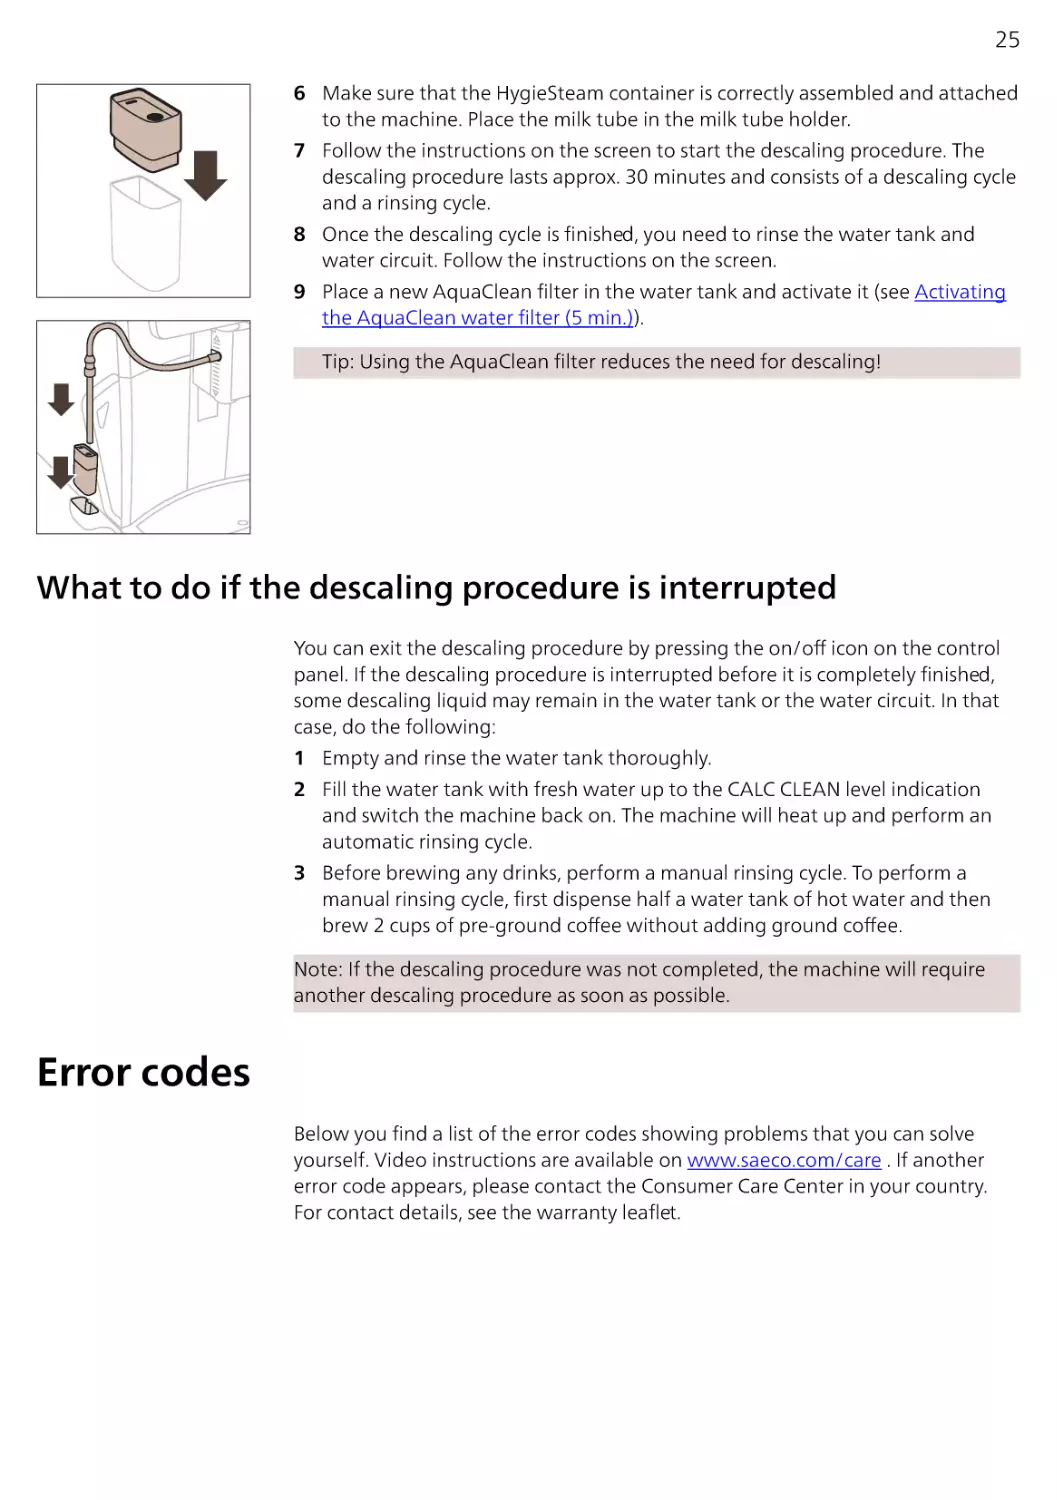 What to do if the descaling procedure is interrupted
Error codes